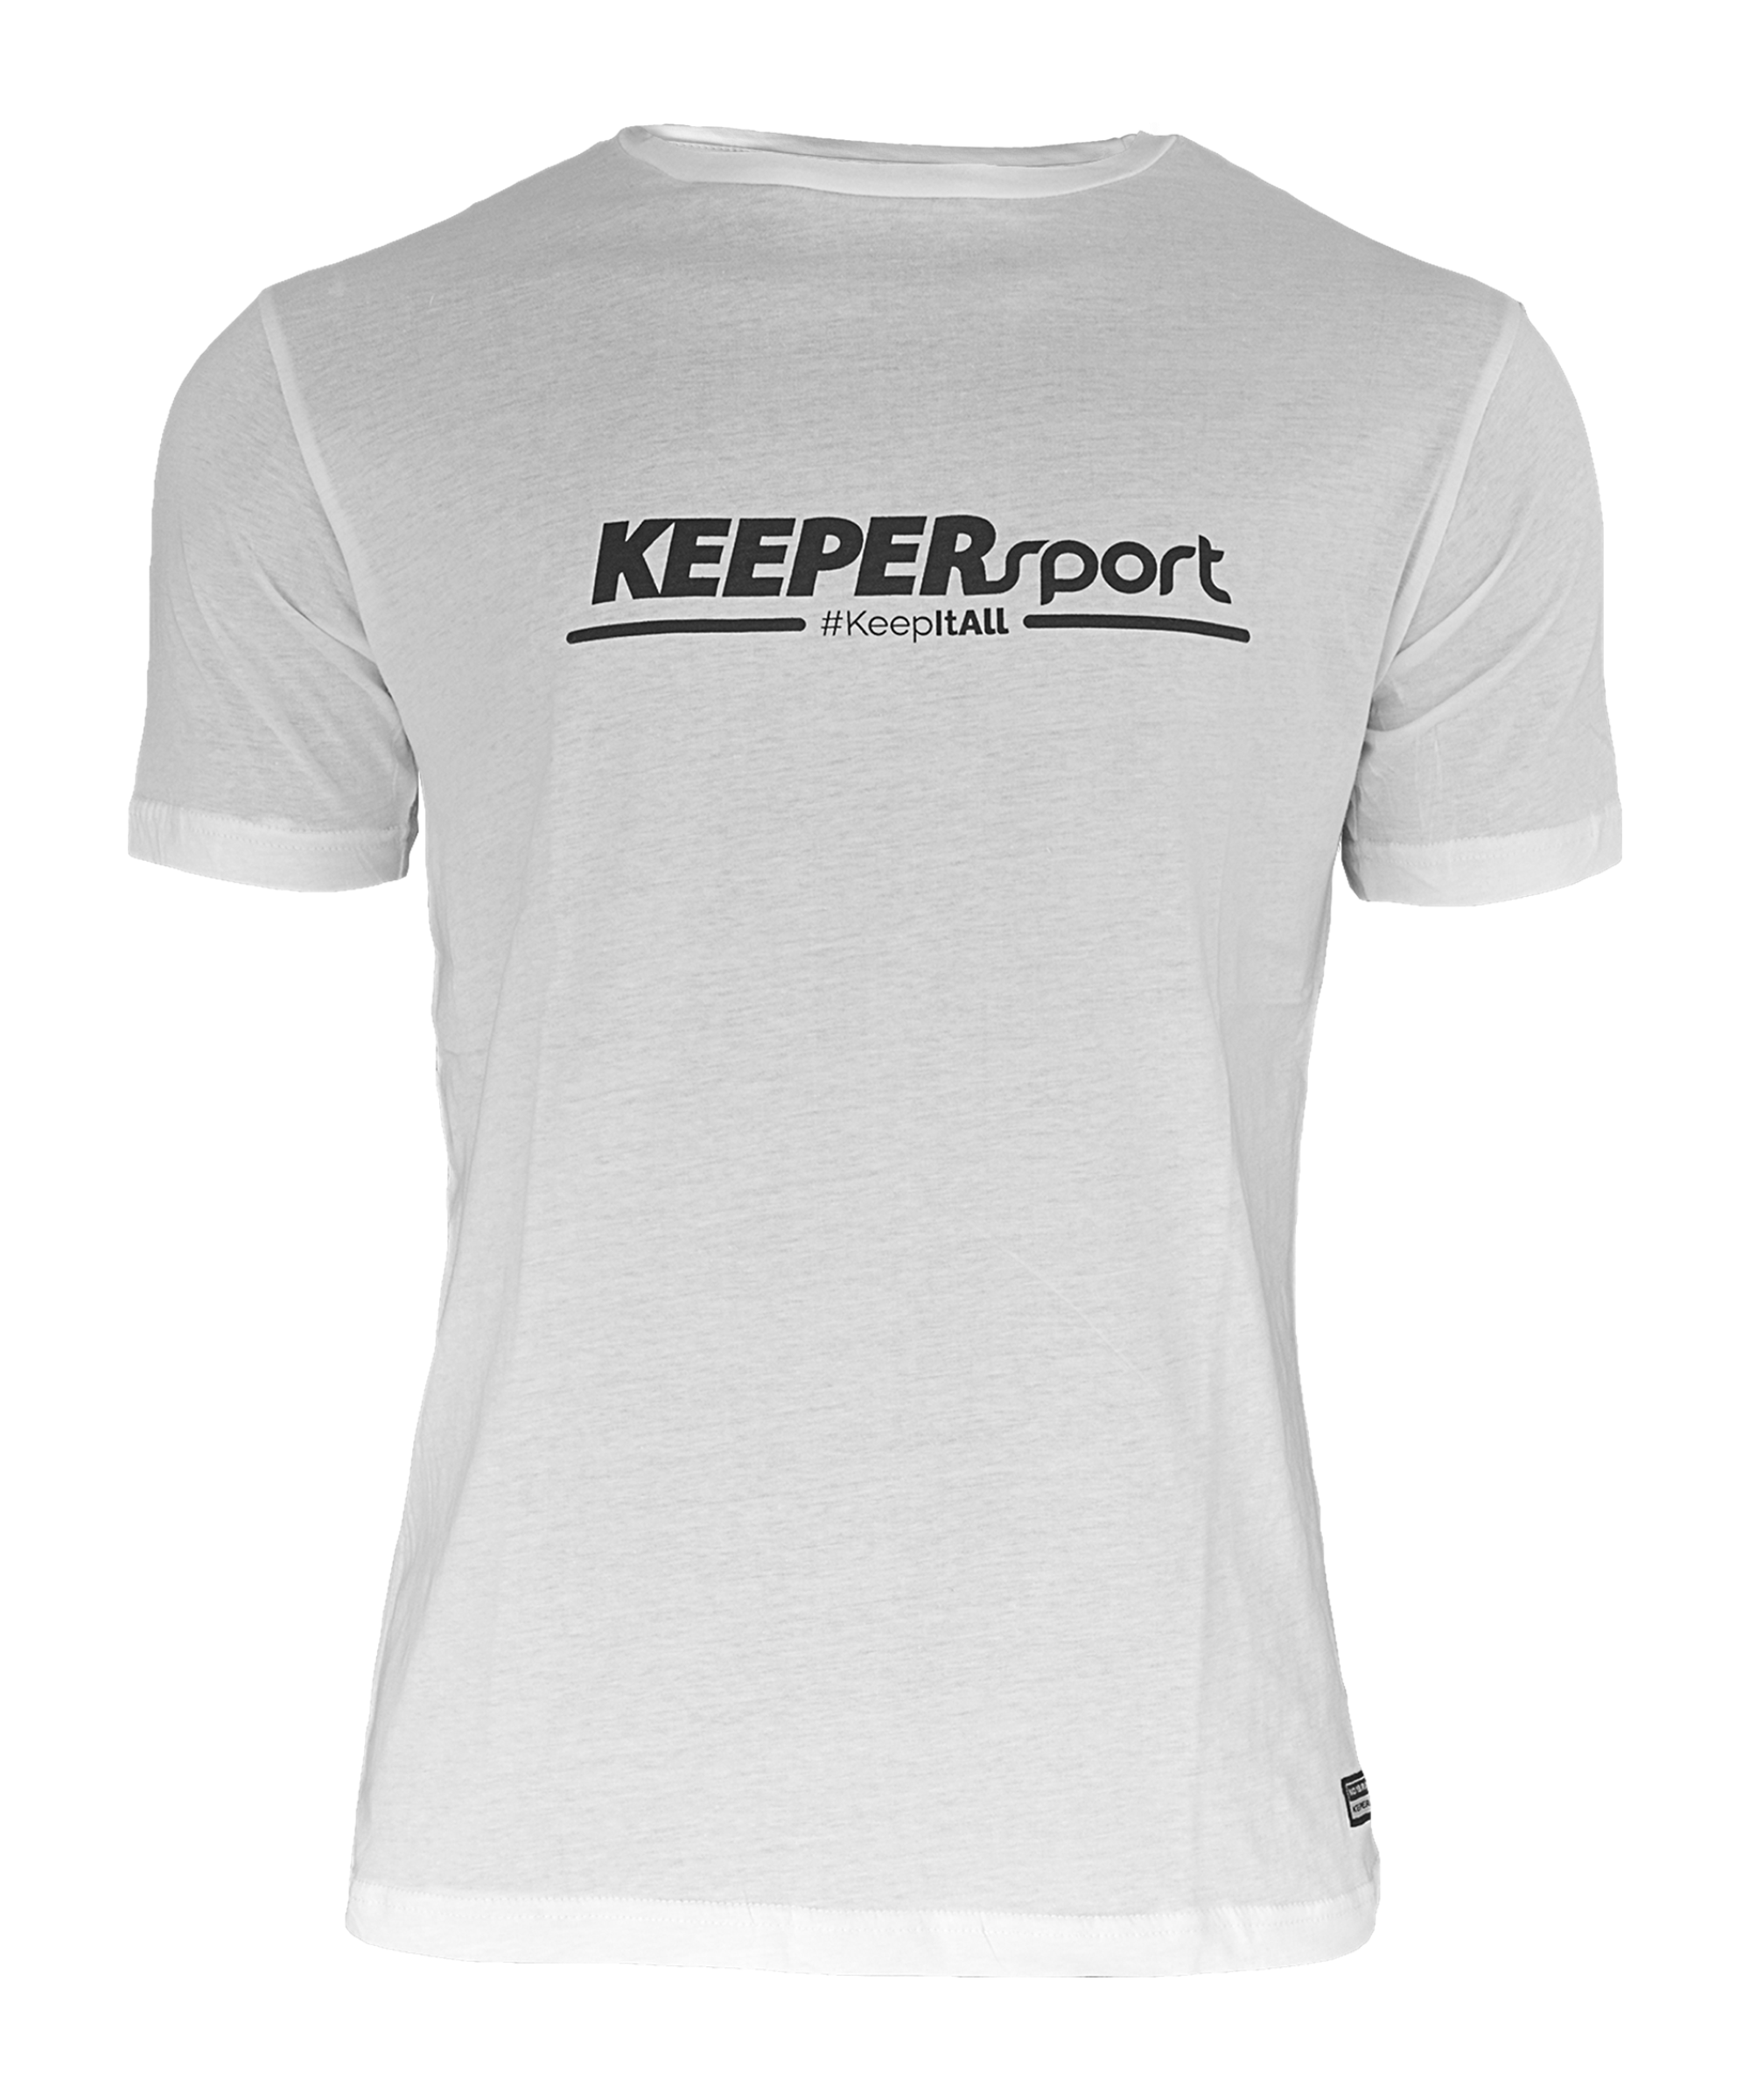 KEEPERsport T-Shirt white